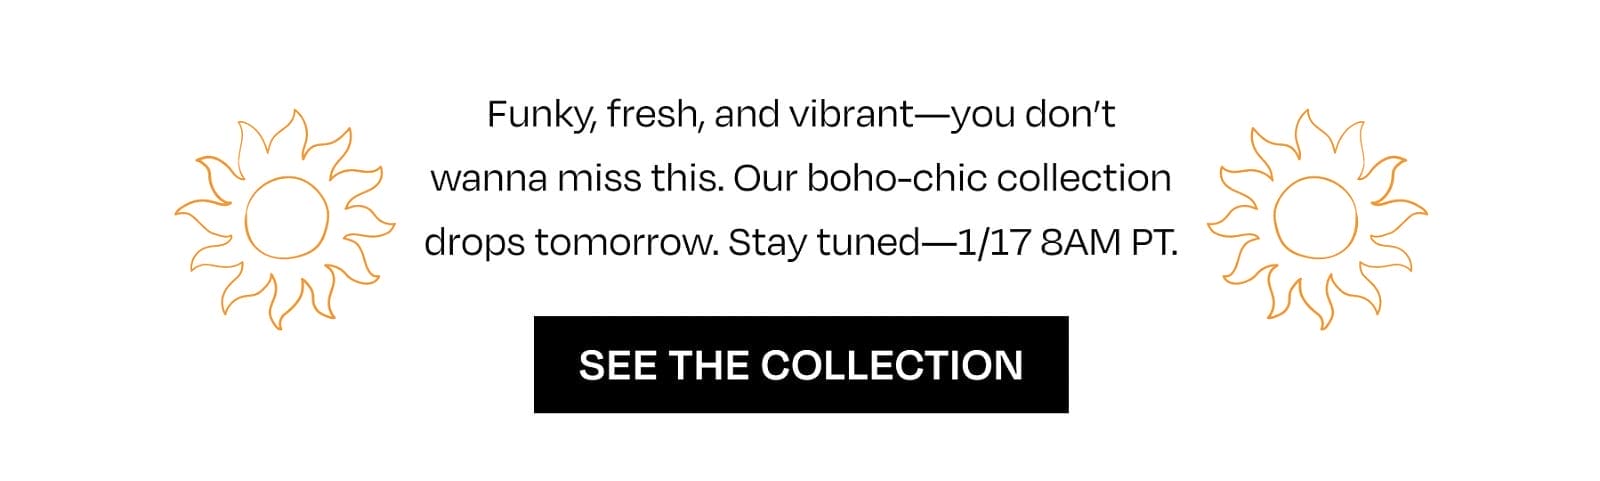 Funky, fresh, and vibrant—you don’t wanna miss this. Our boho-chic collection drops tomorrow. Stay tuned—1/17 8AM PT